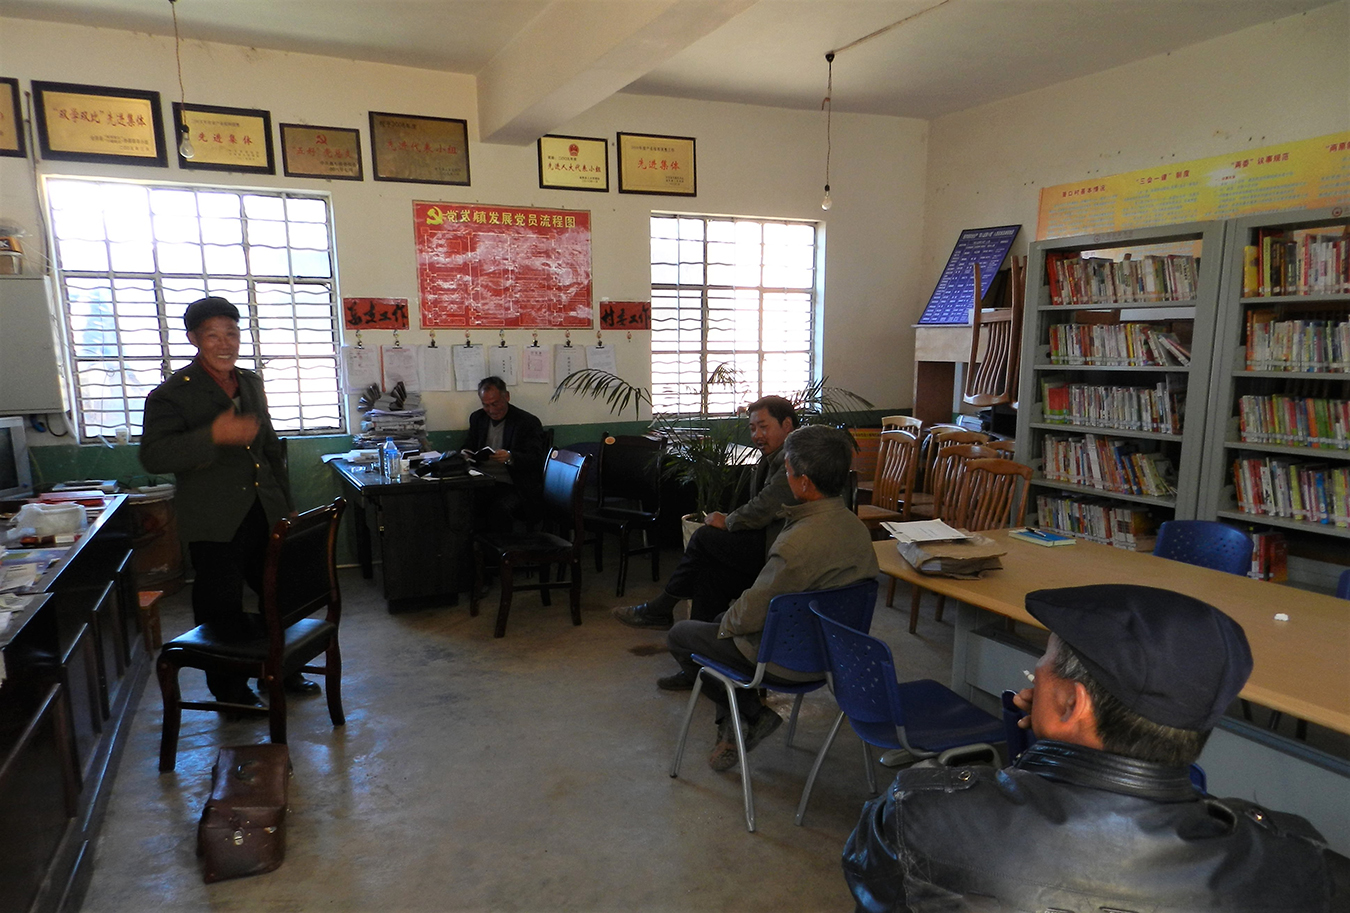 A mediation session is underway in the foyer of a village committee building. Photo by Andrea E. Pia.